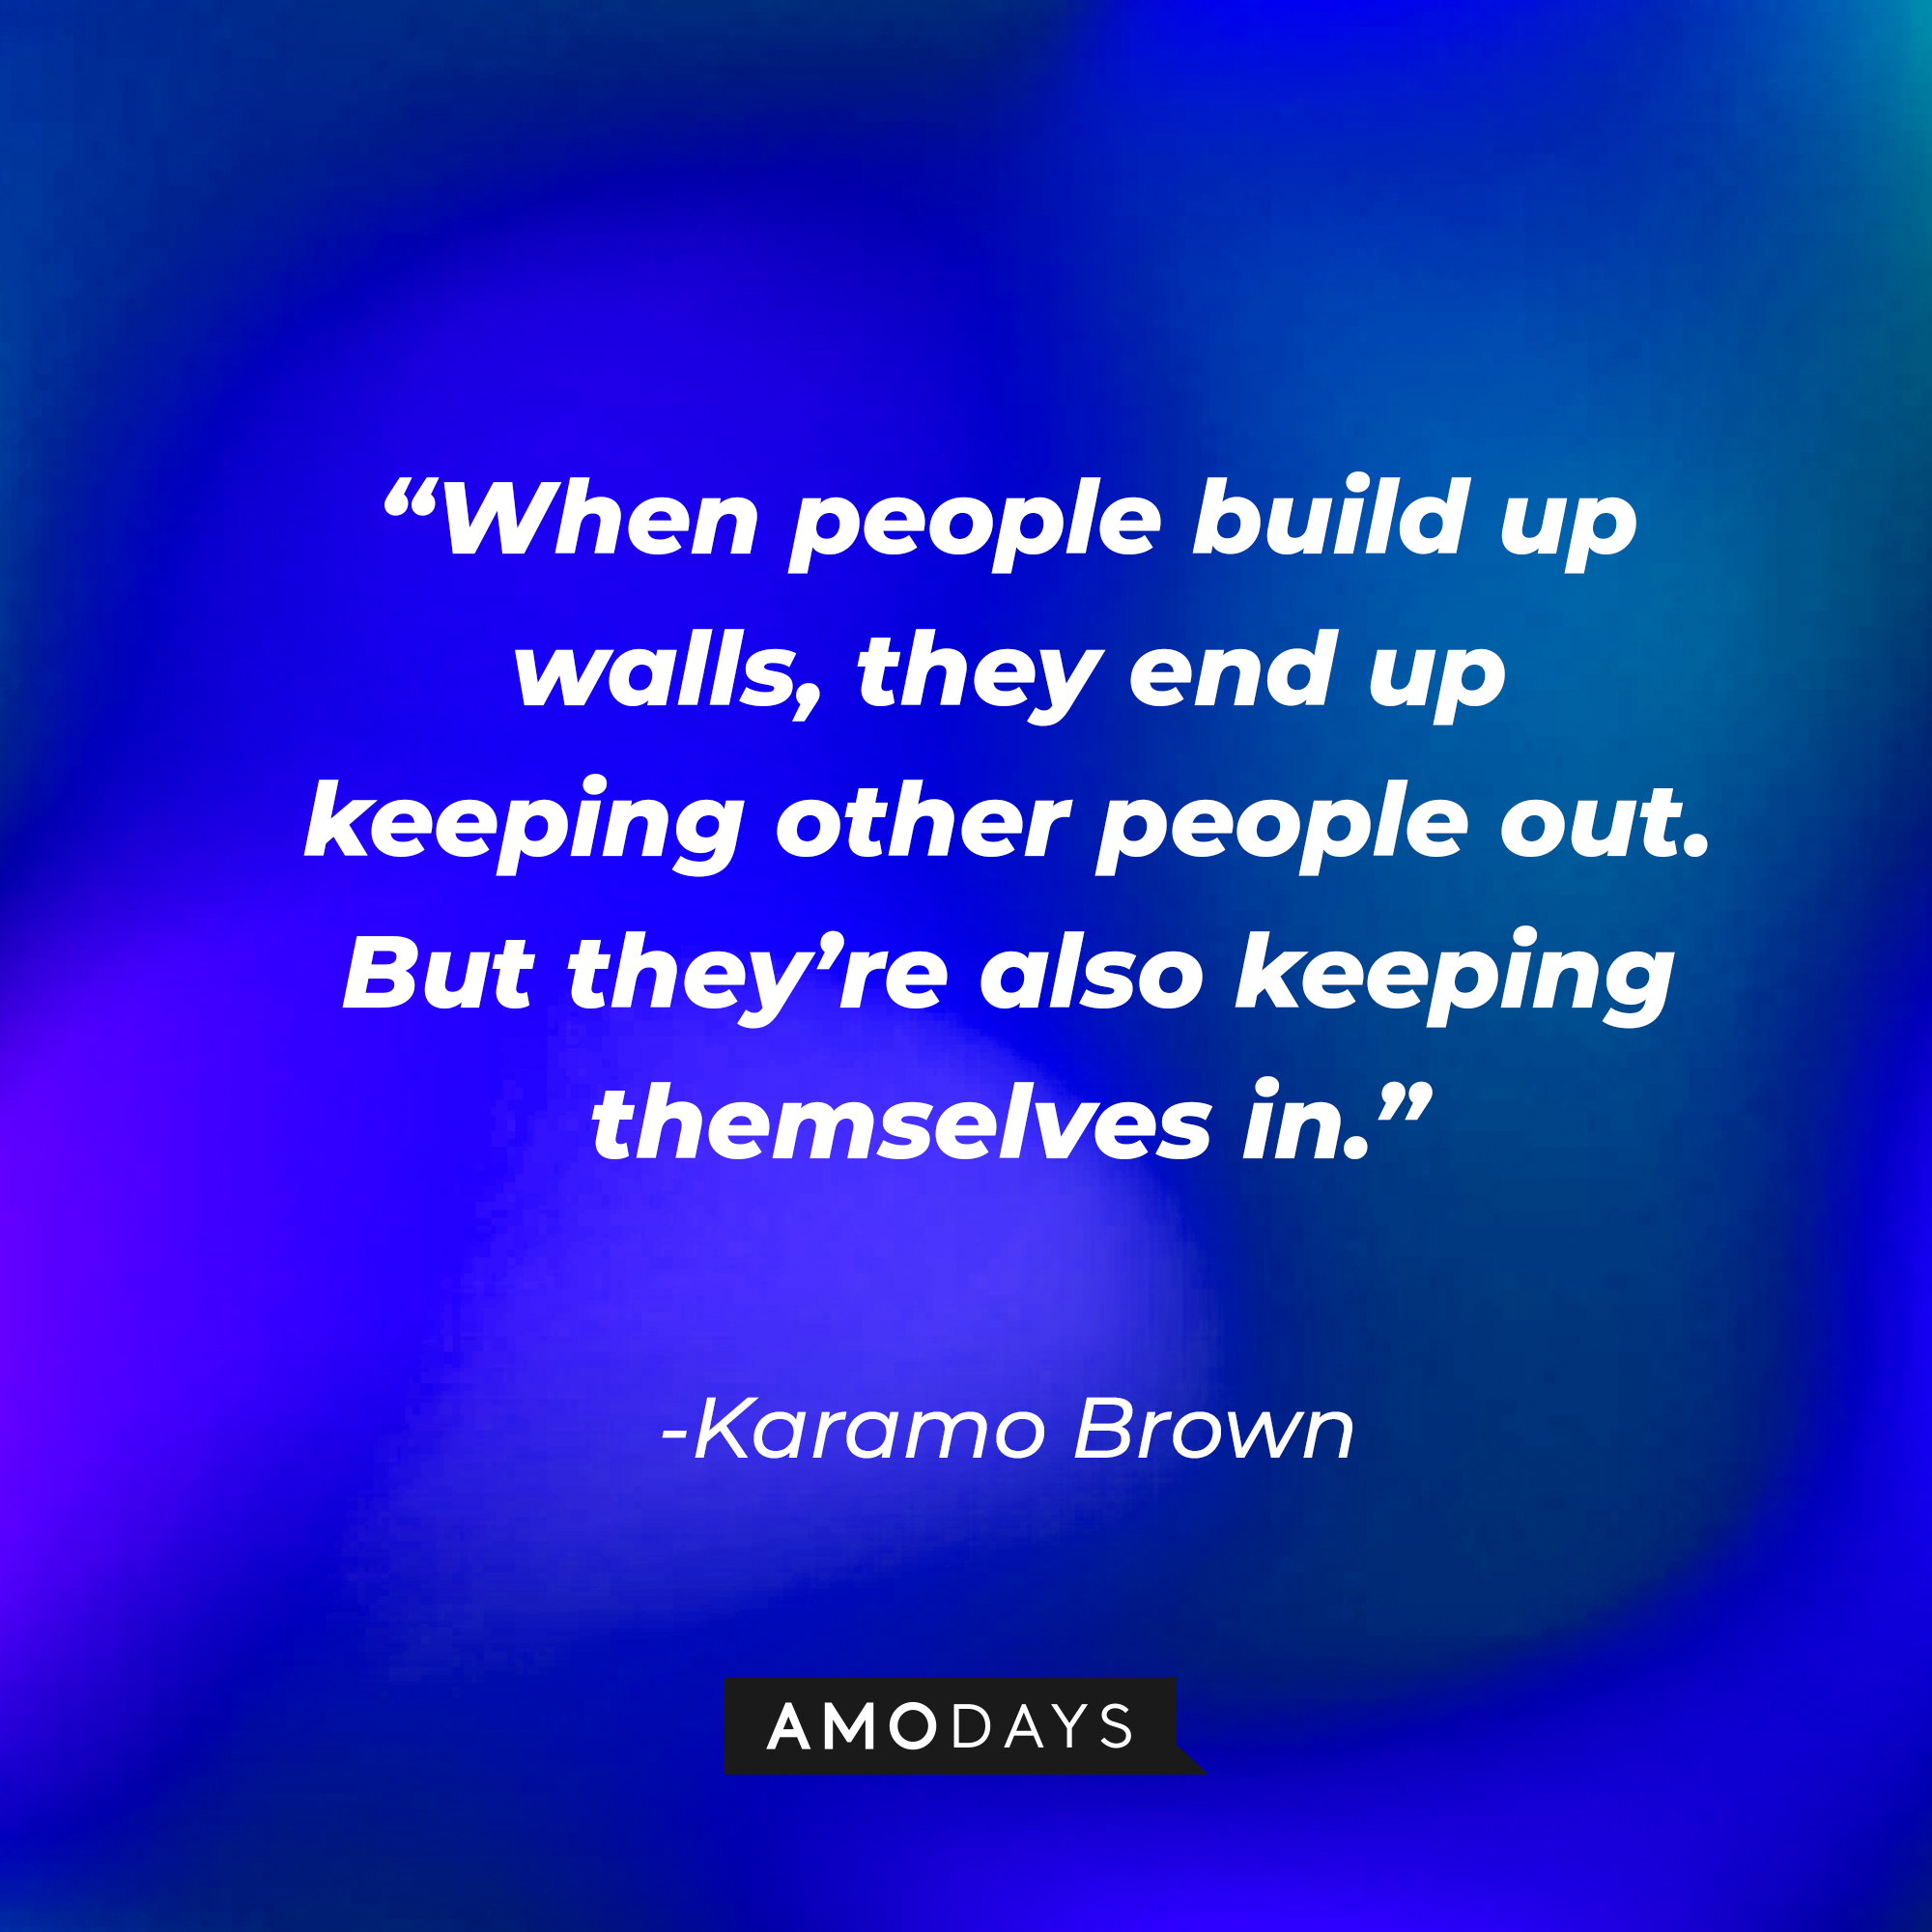 Karamo Brown's quote: "When people build up walls, they end up keeping other people out. But they're also keeping themselves in." | Source: Getty Images